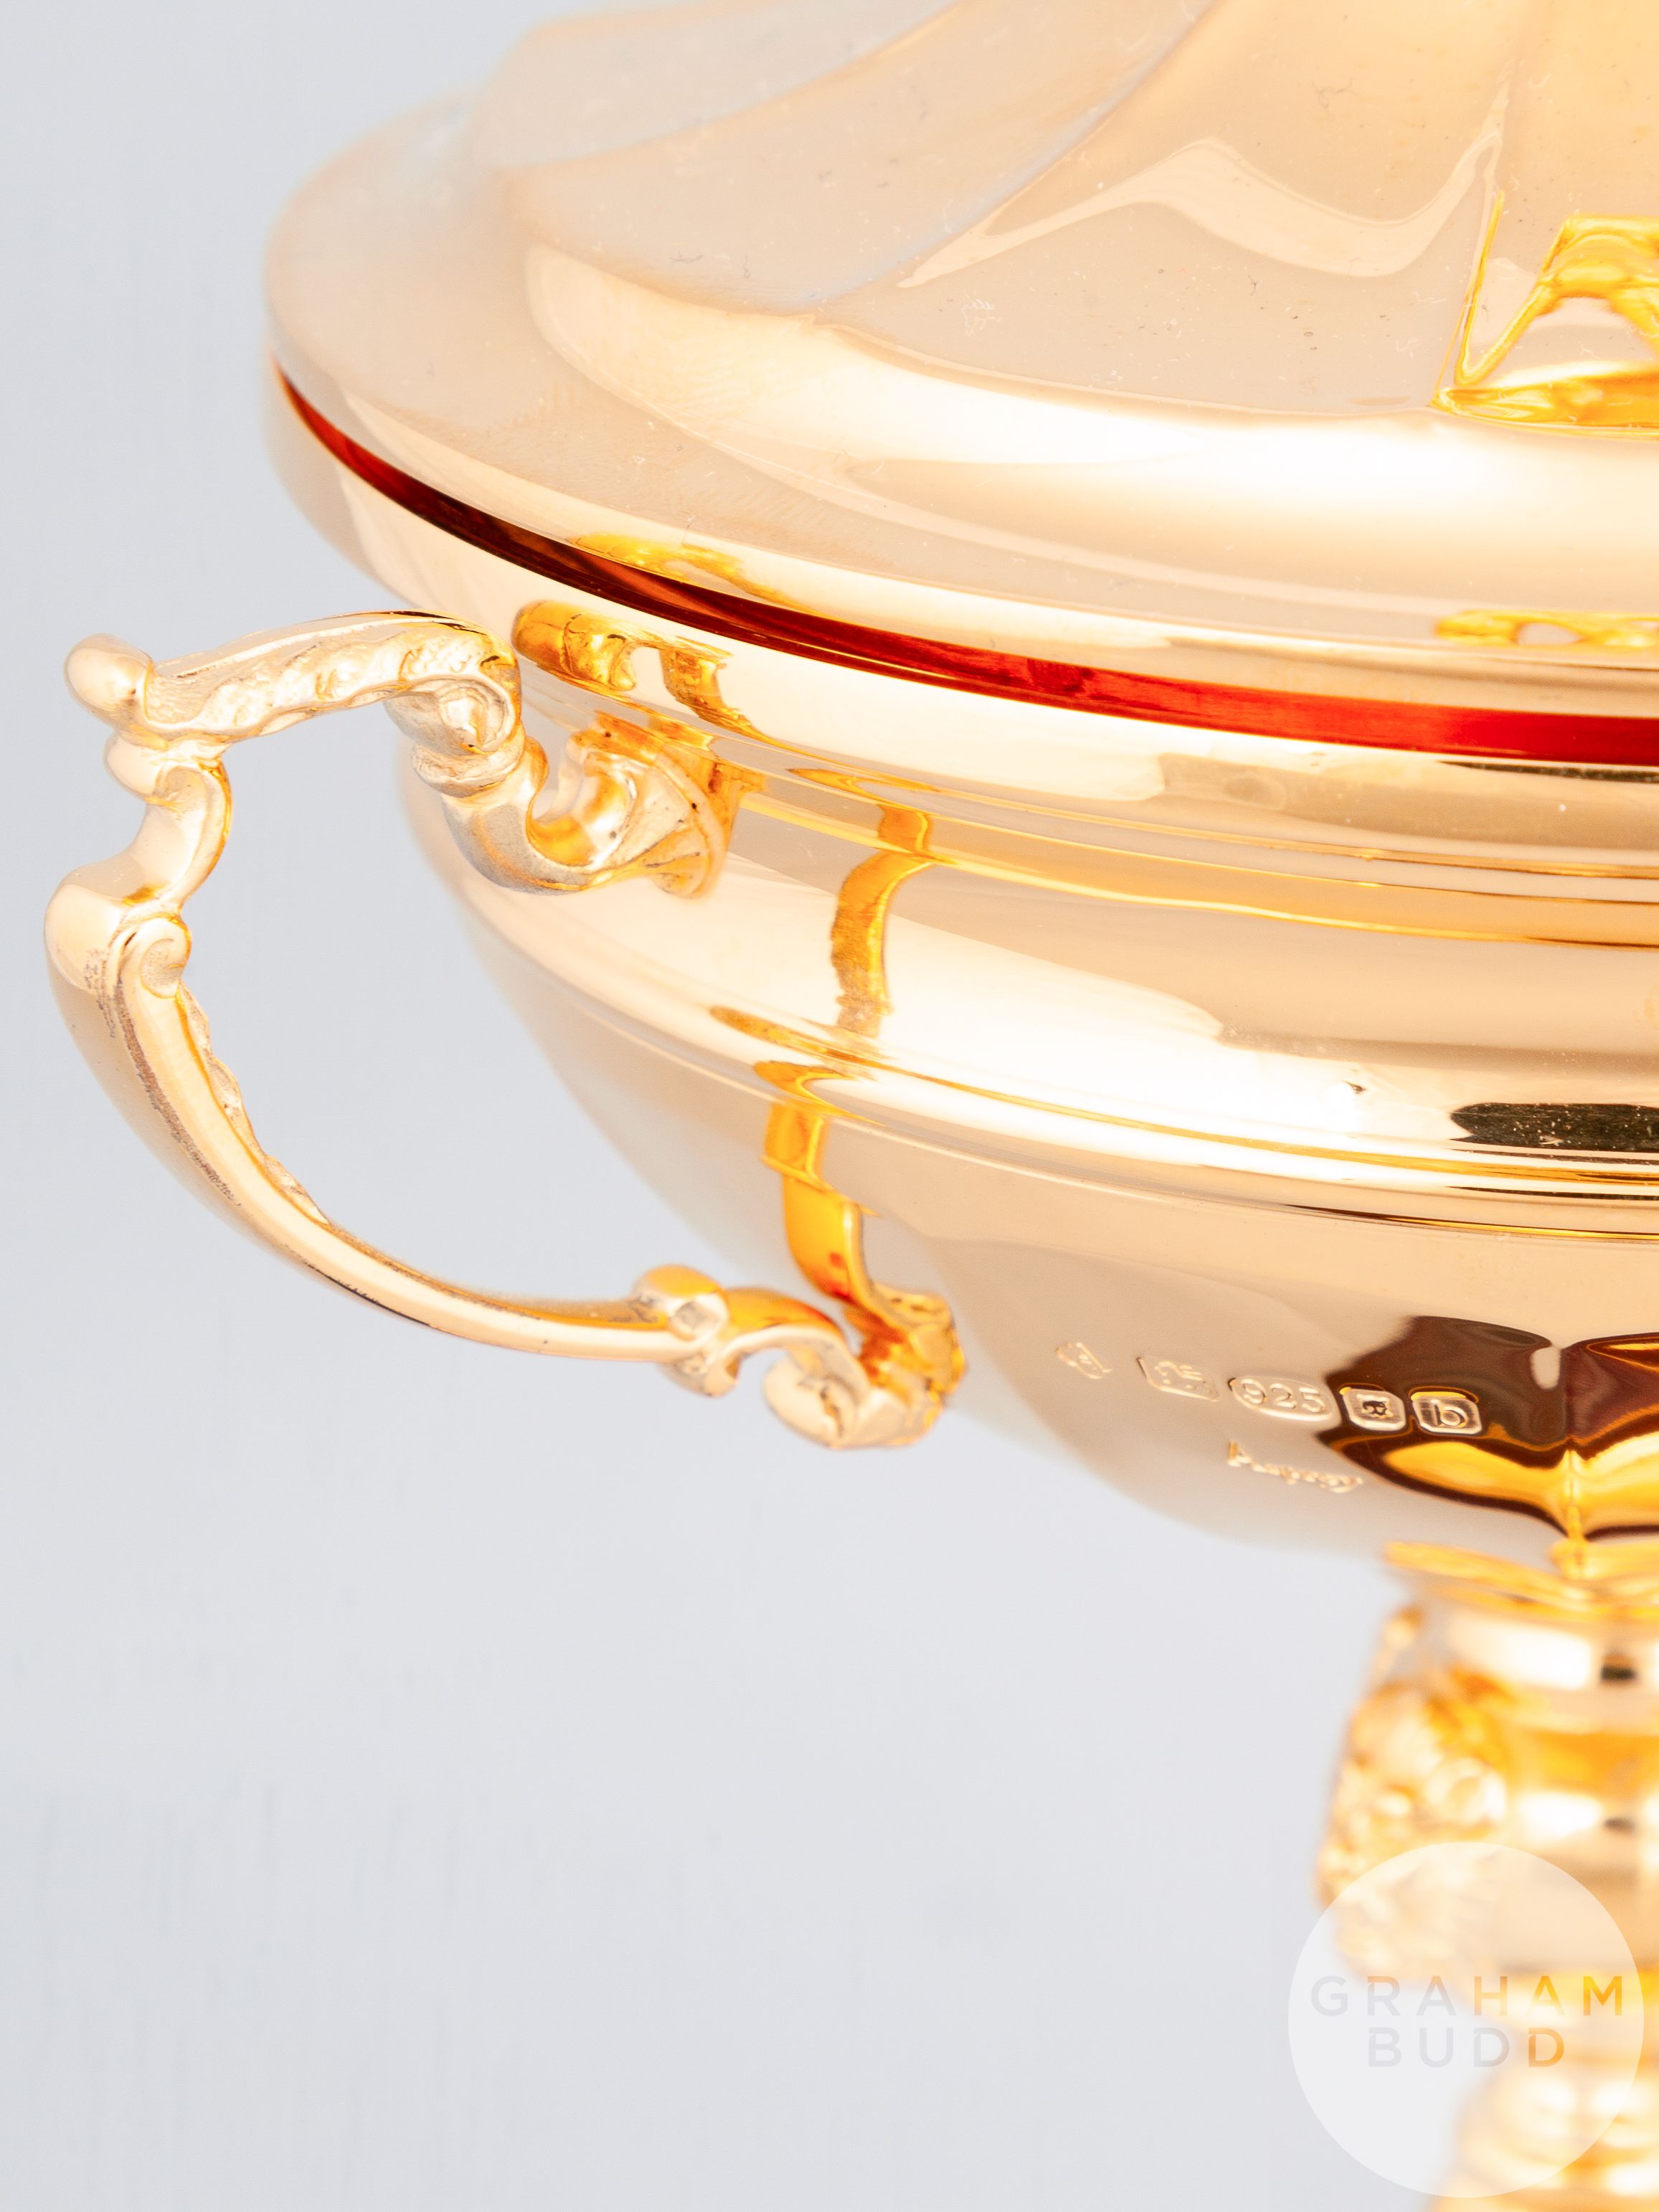 George Will rare silver-gilt replica Ryder Cup trophy - Image 9 of 11